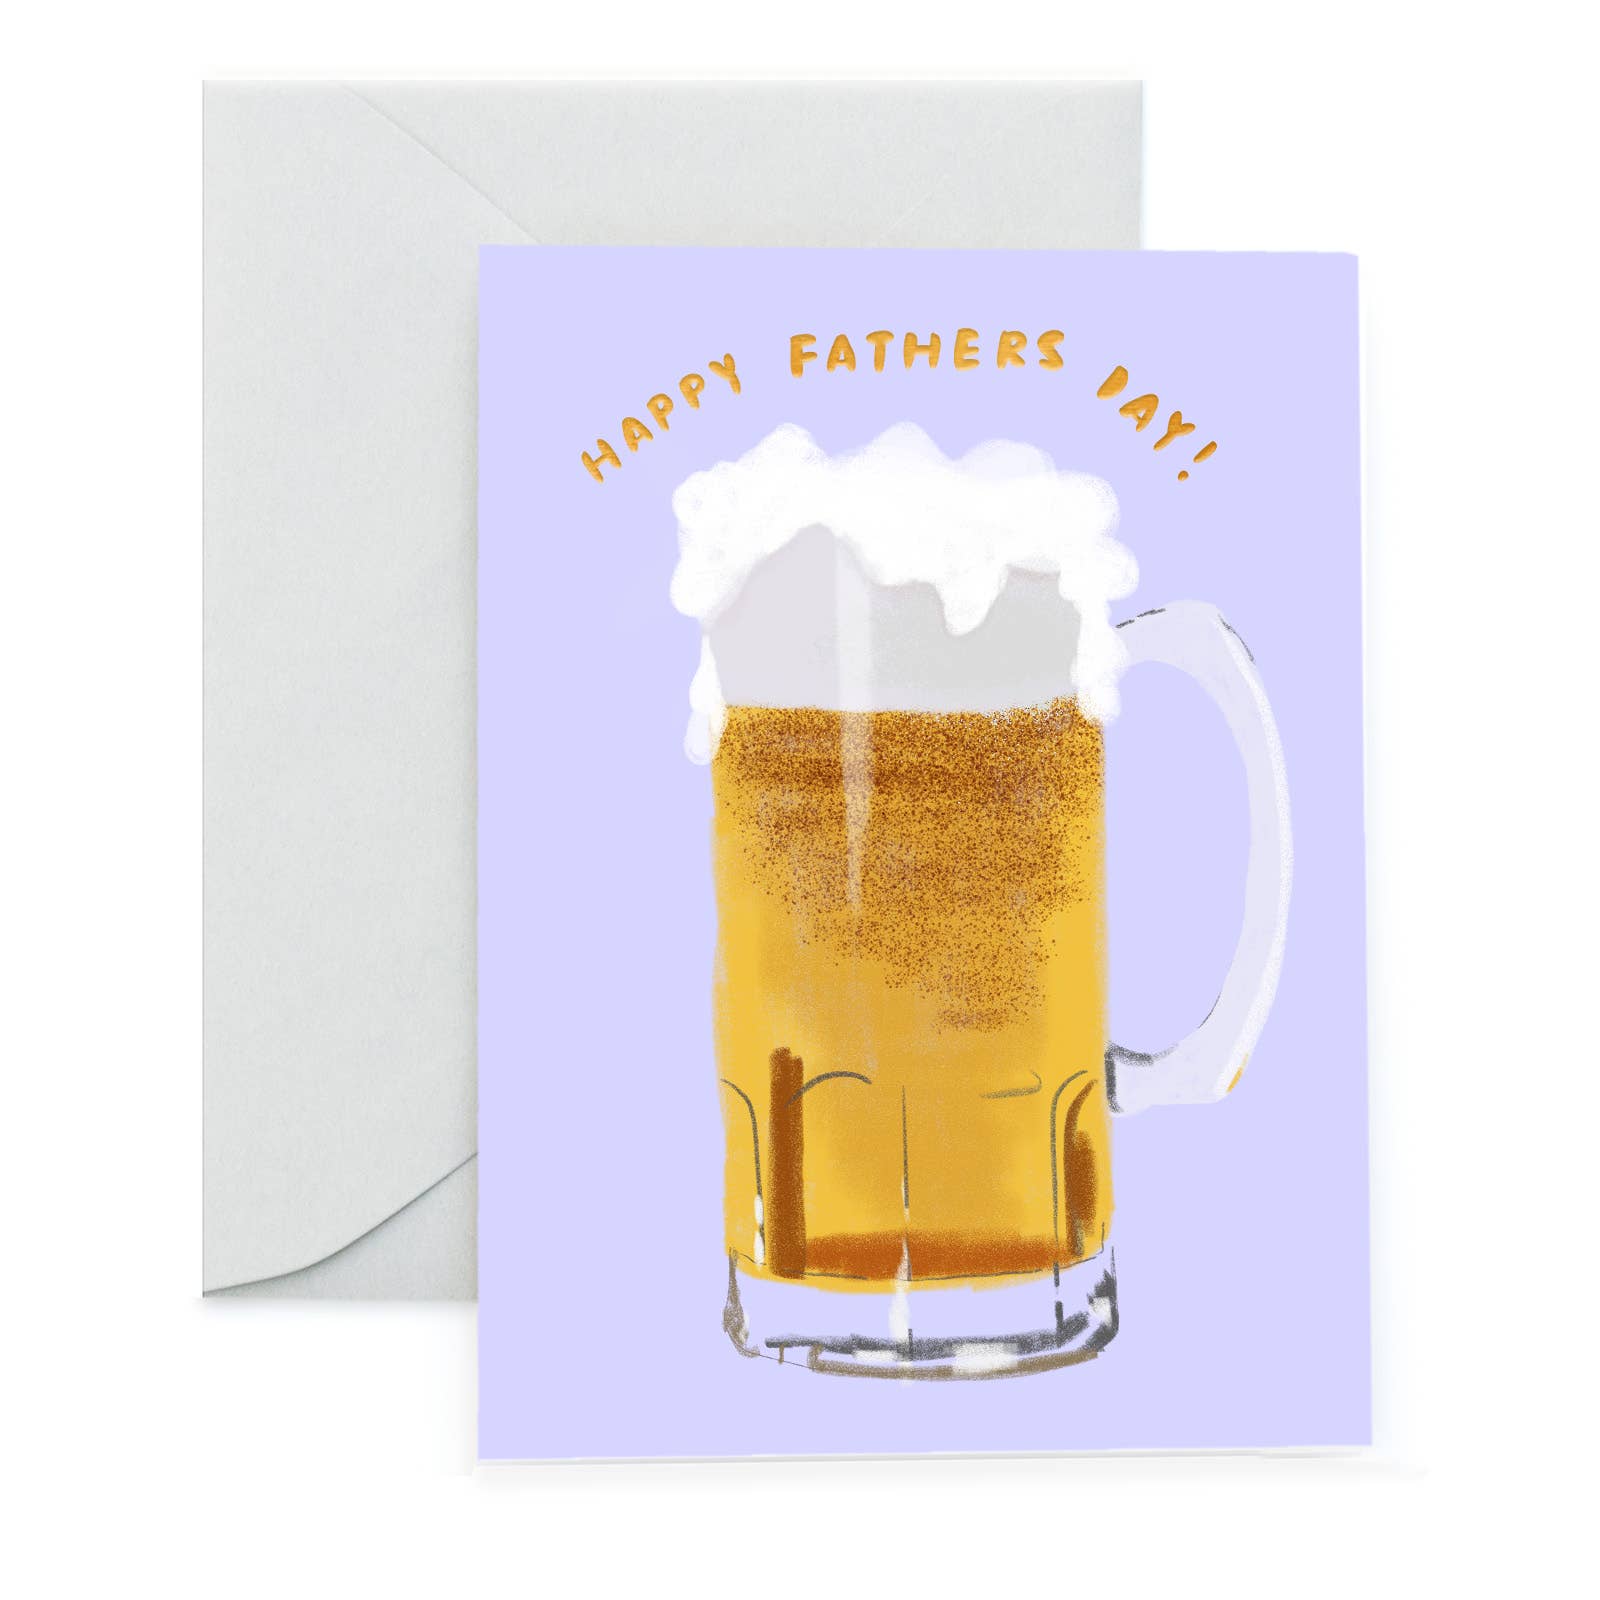 Father's Day greeting card. Text up top reads "Happy Father's Day" with an image of a frothy beer mug below